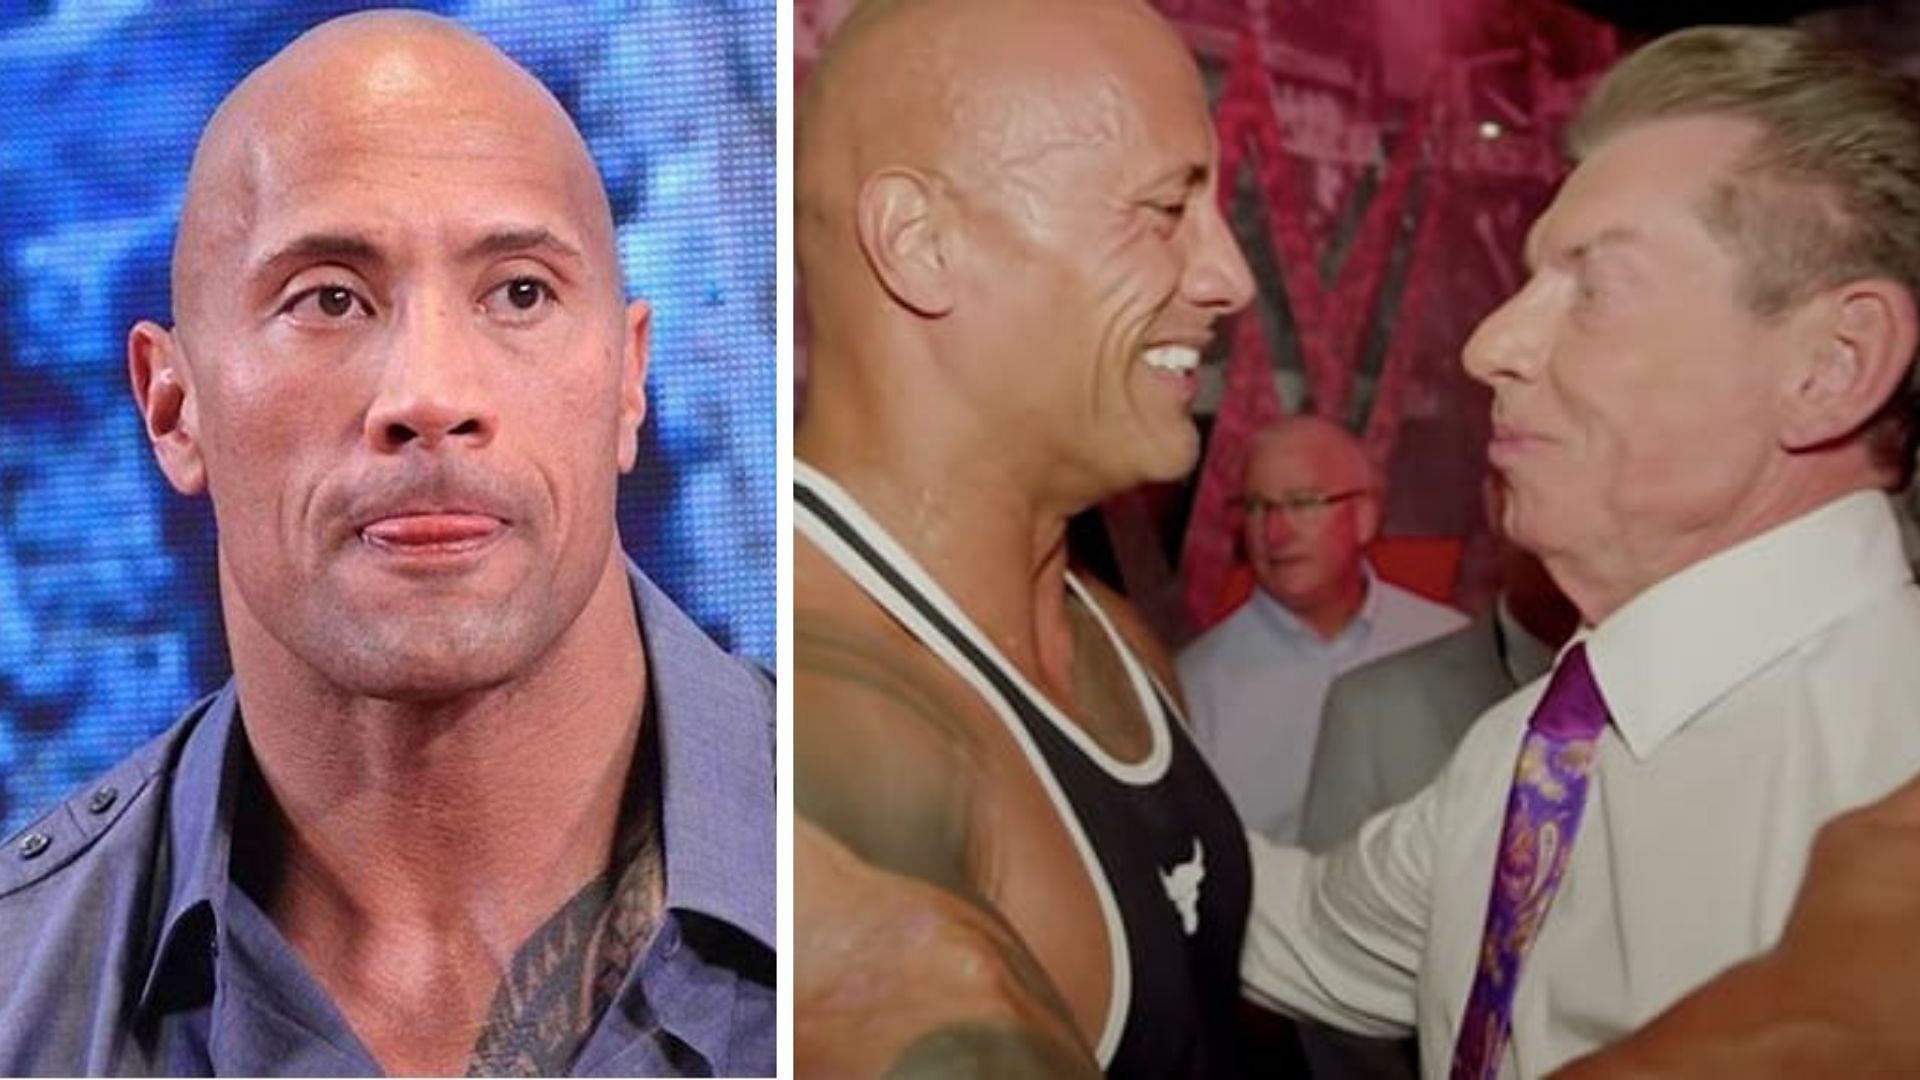 The Rock is a 17-time WWE champion